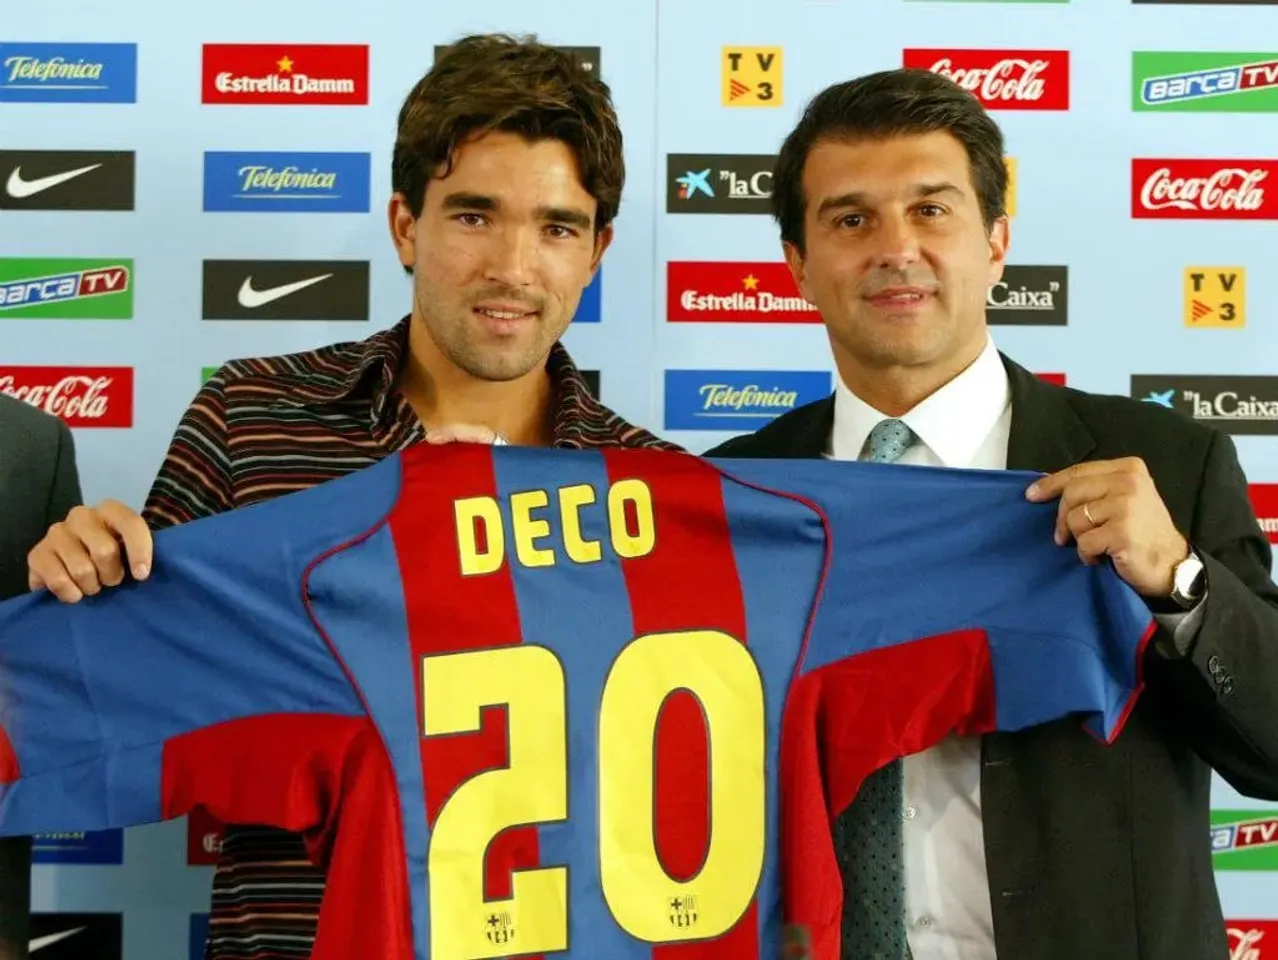 Deco has been named the new sporting director of FC Barcelona